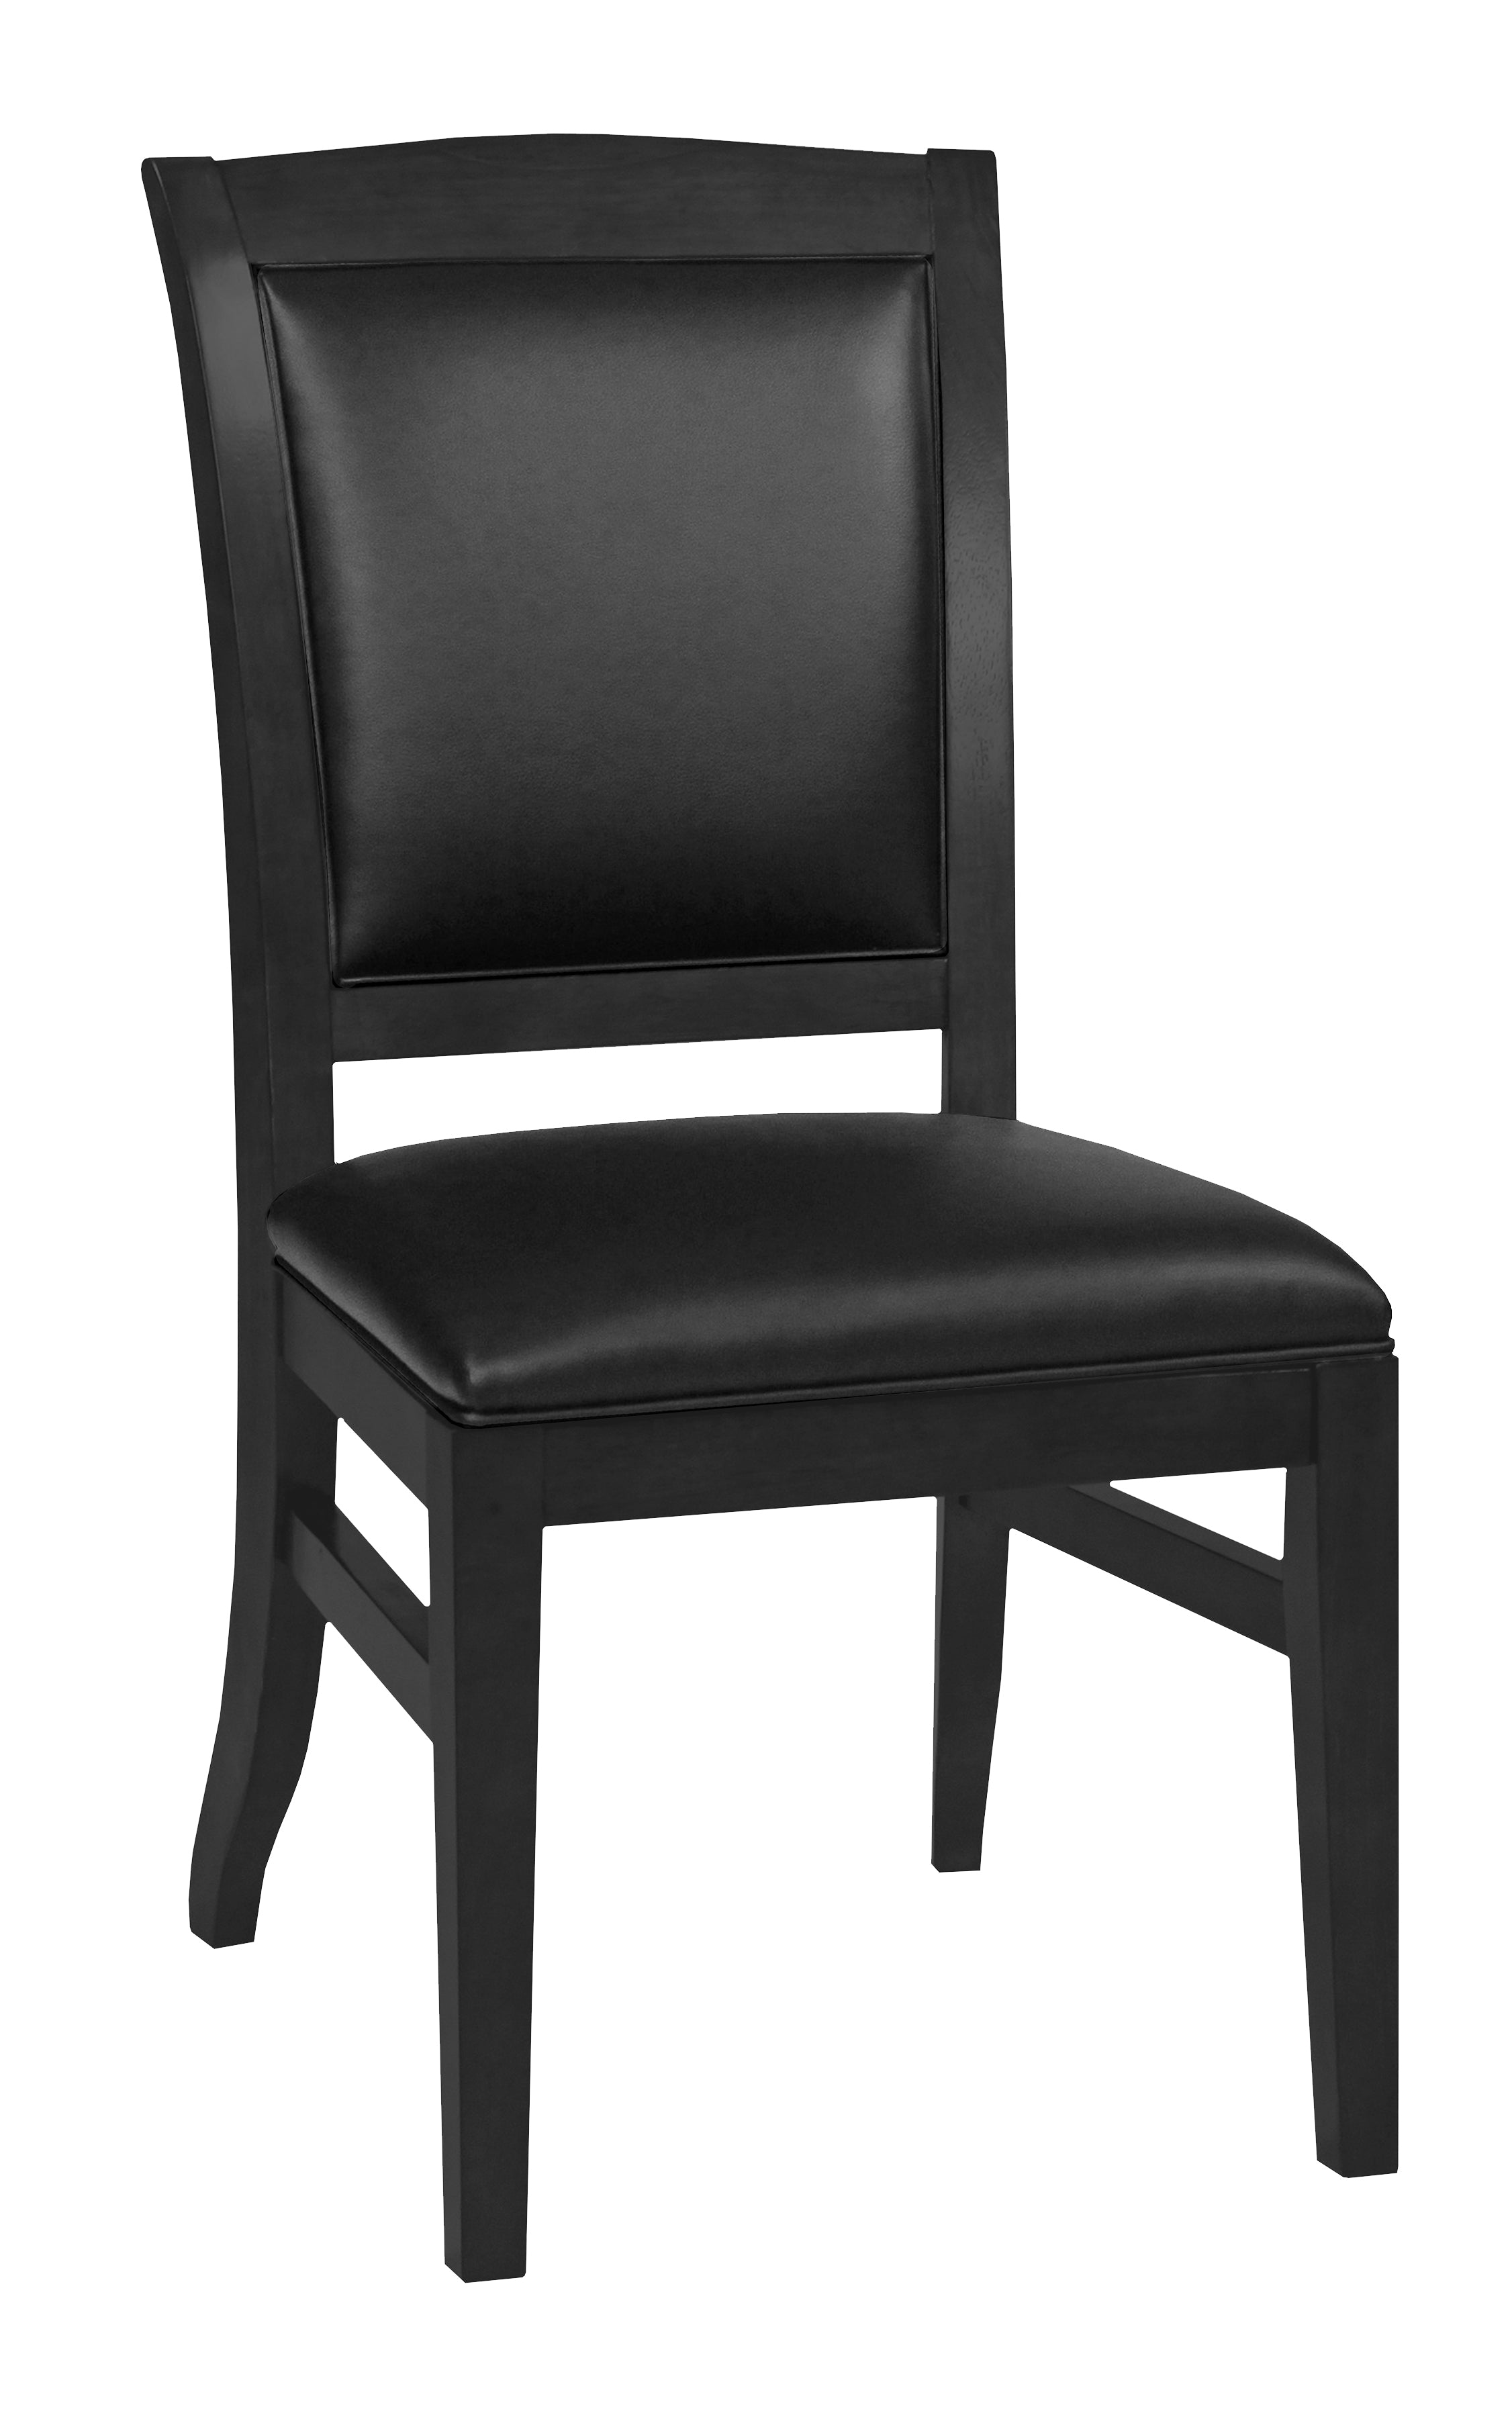 Legacy Billiards Heritage Dining Game Chair in Raven Finish